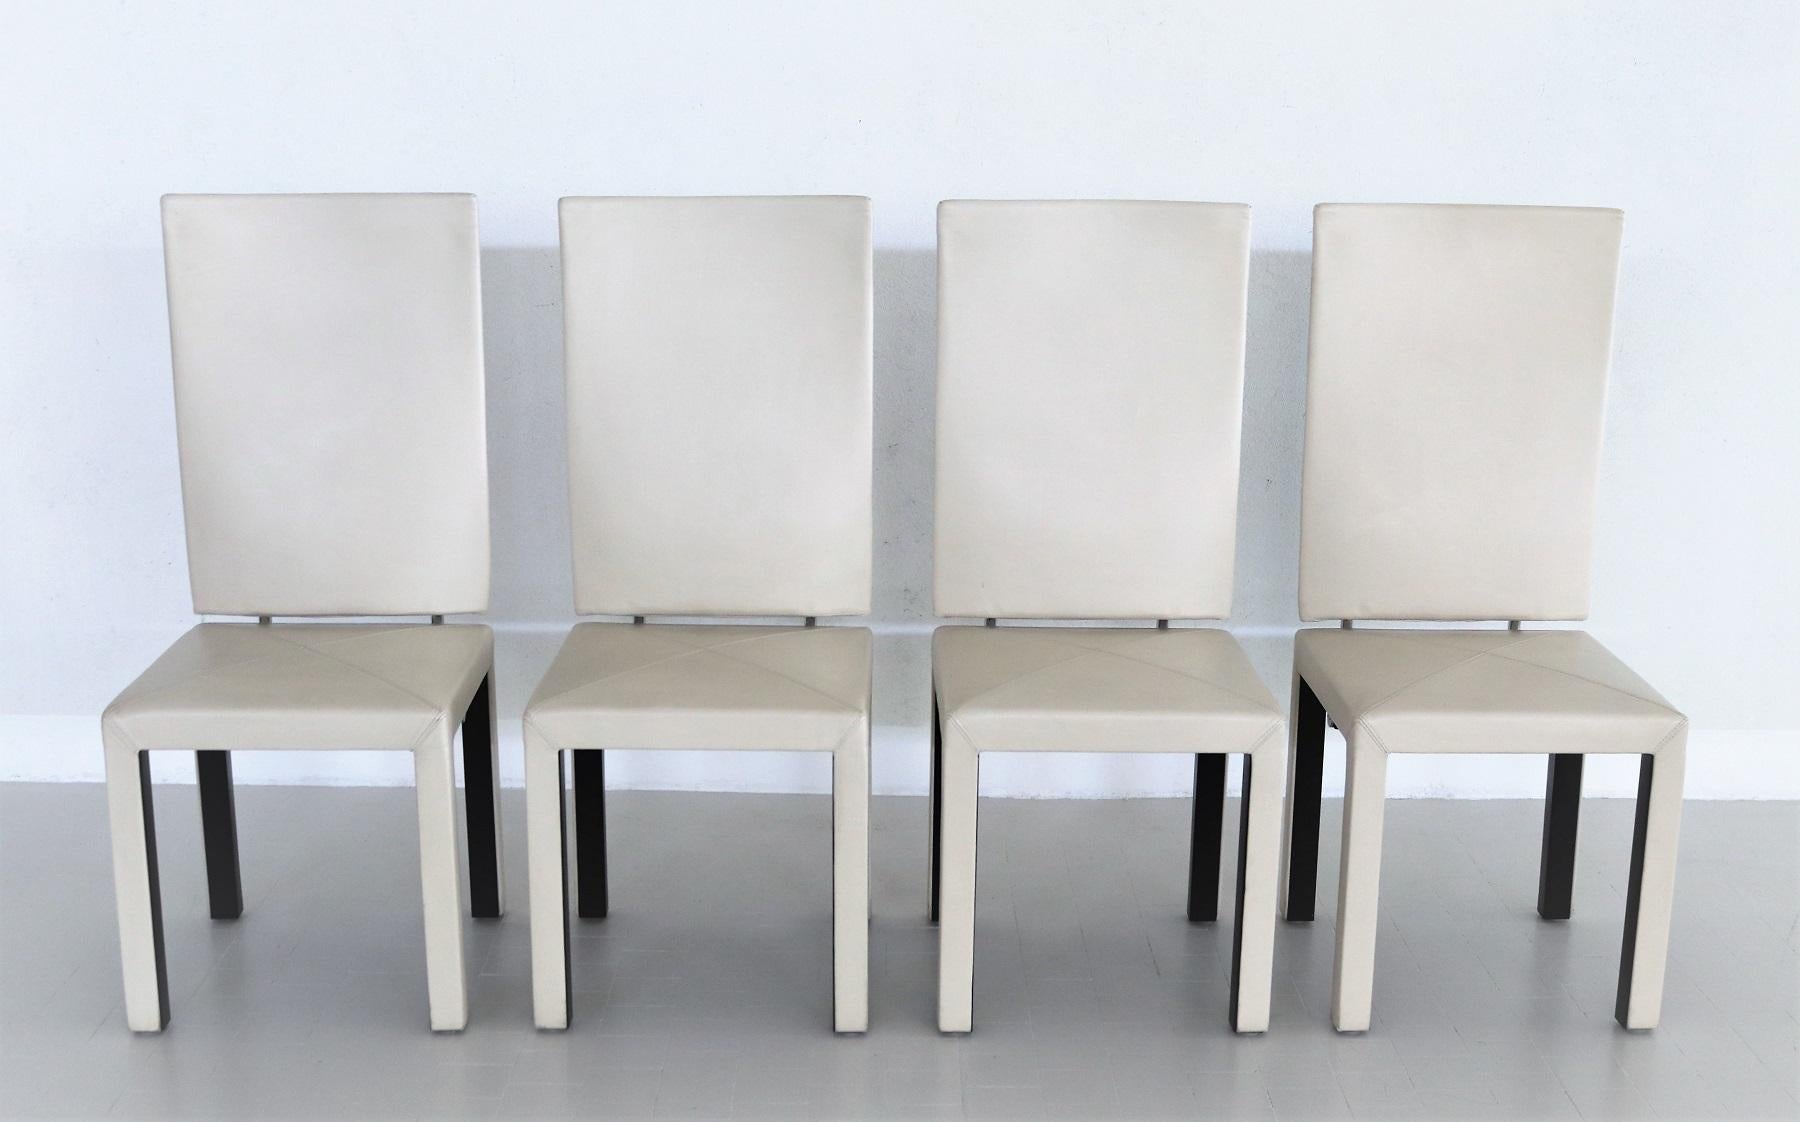 Set of four dining chairs by designer Paolo Piva, manufactured by B&B Italia in Italy in the 1980s.
The chairs have a high back, which is connected to the seat with a special metal construction. This construction allows a slight swing.
The chairs